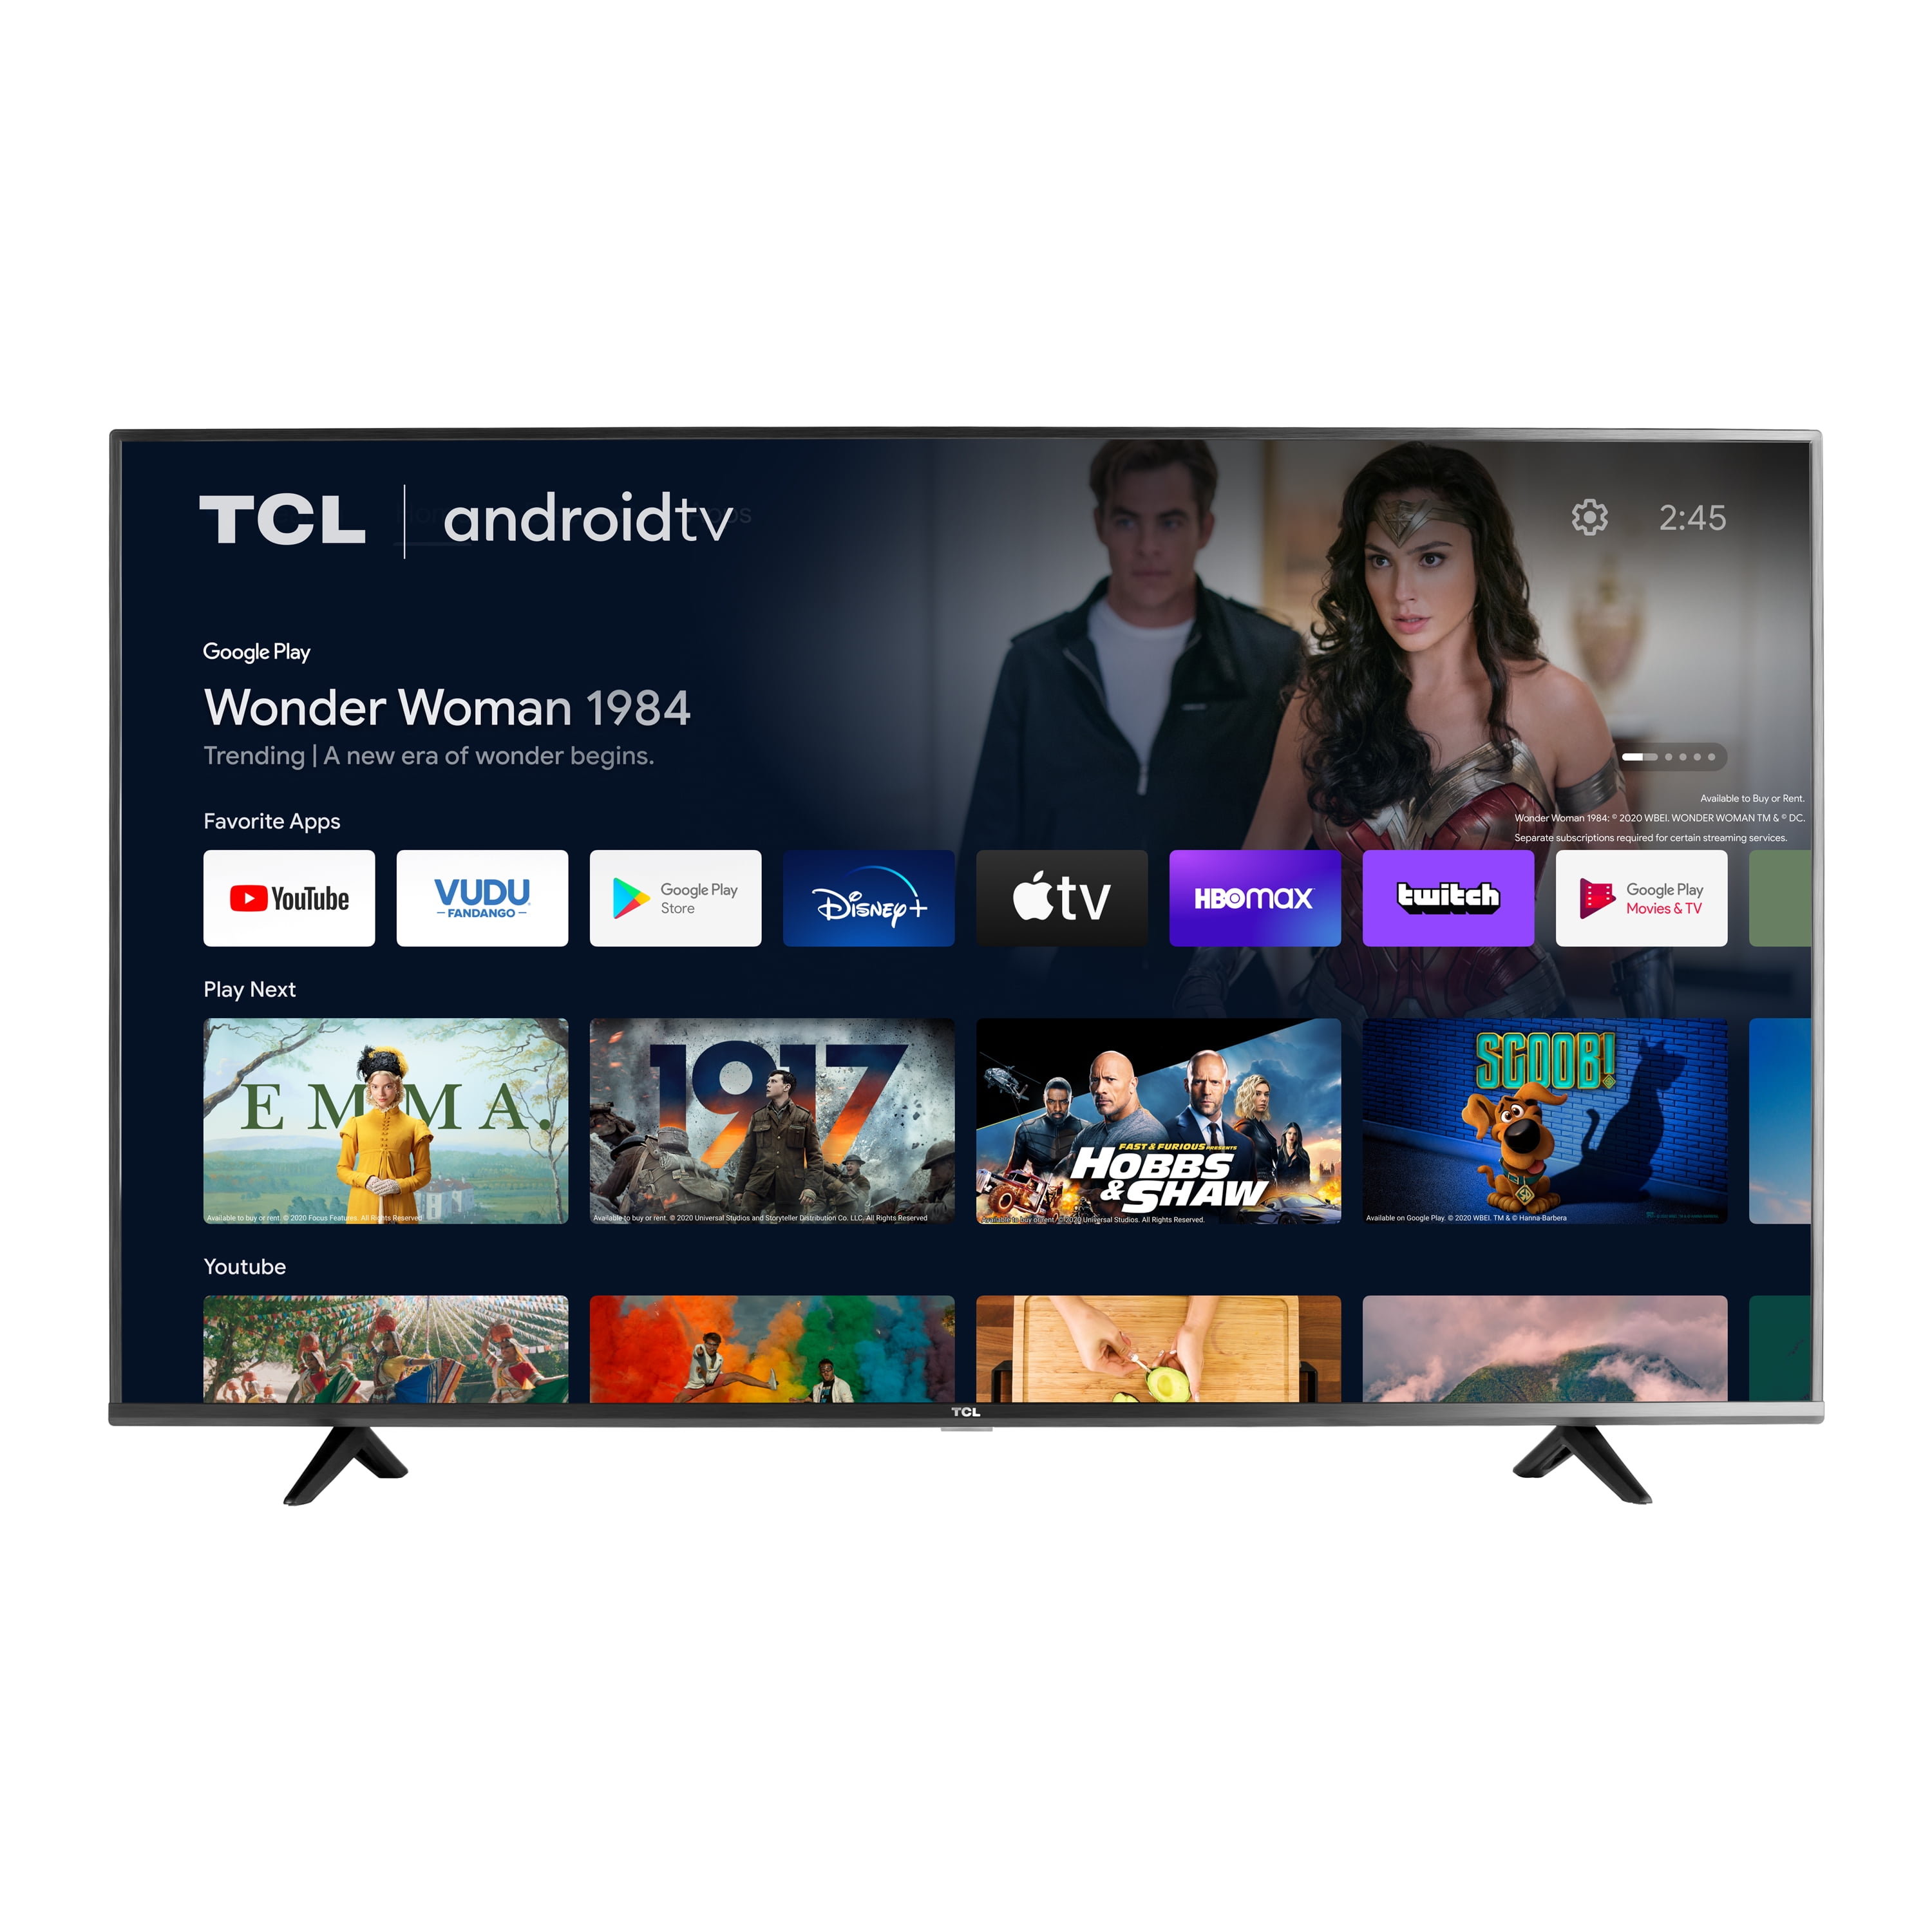 Smart TV 43 Full HD HDR, Wi-FI, Android TV, Google Assistant, Borda Fina  43S615 - TCL - Info Store - Prod